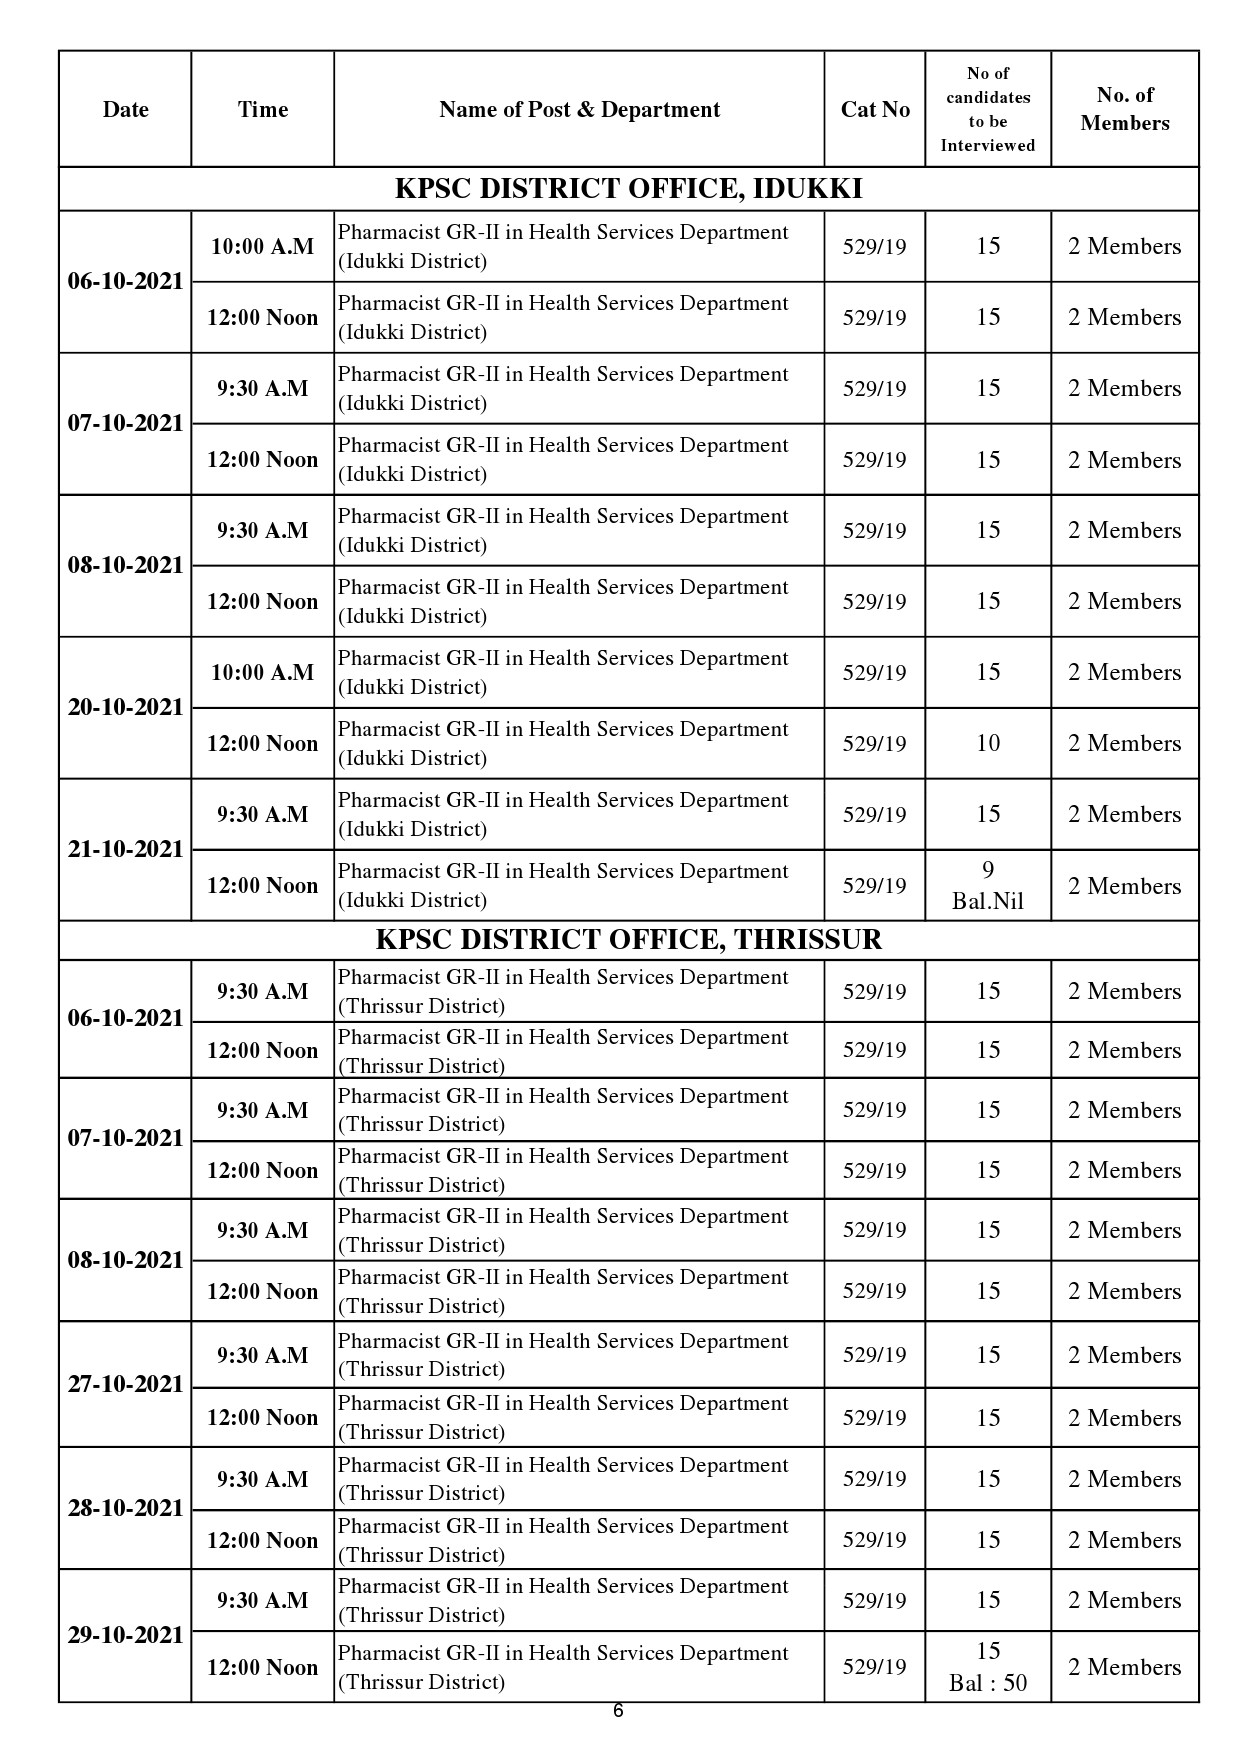 KPSC Interview Programme For The Month Of October 2021 - Notification Image 6